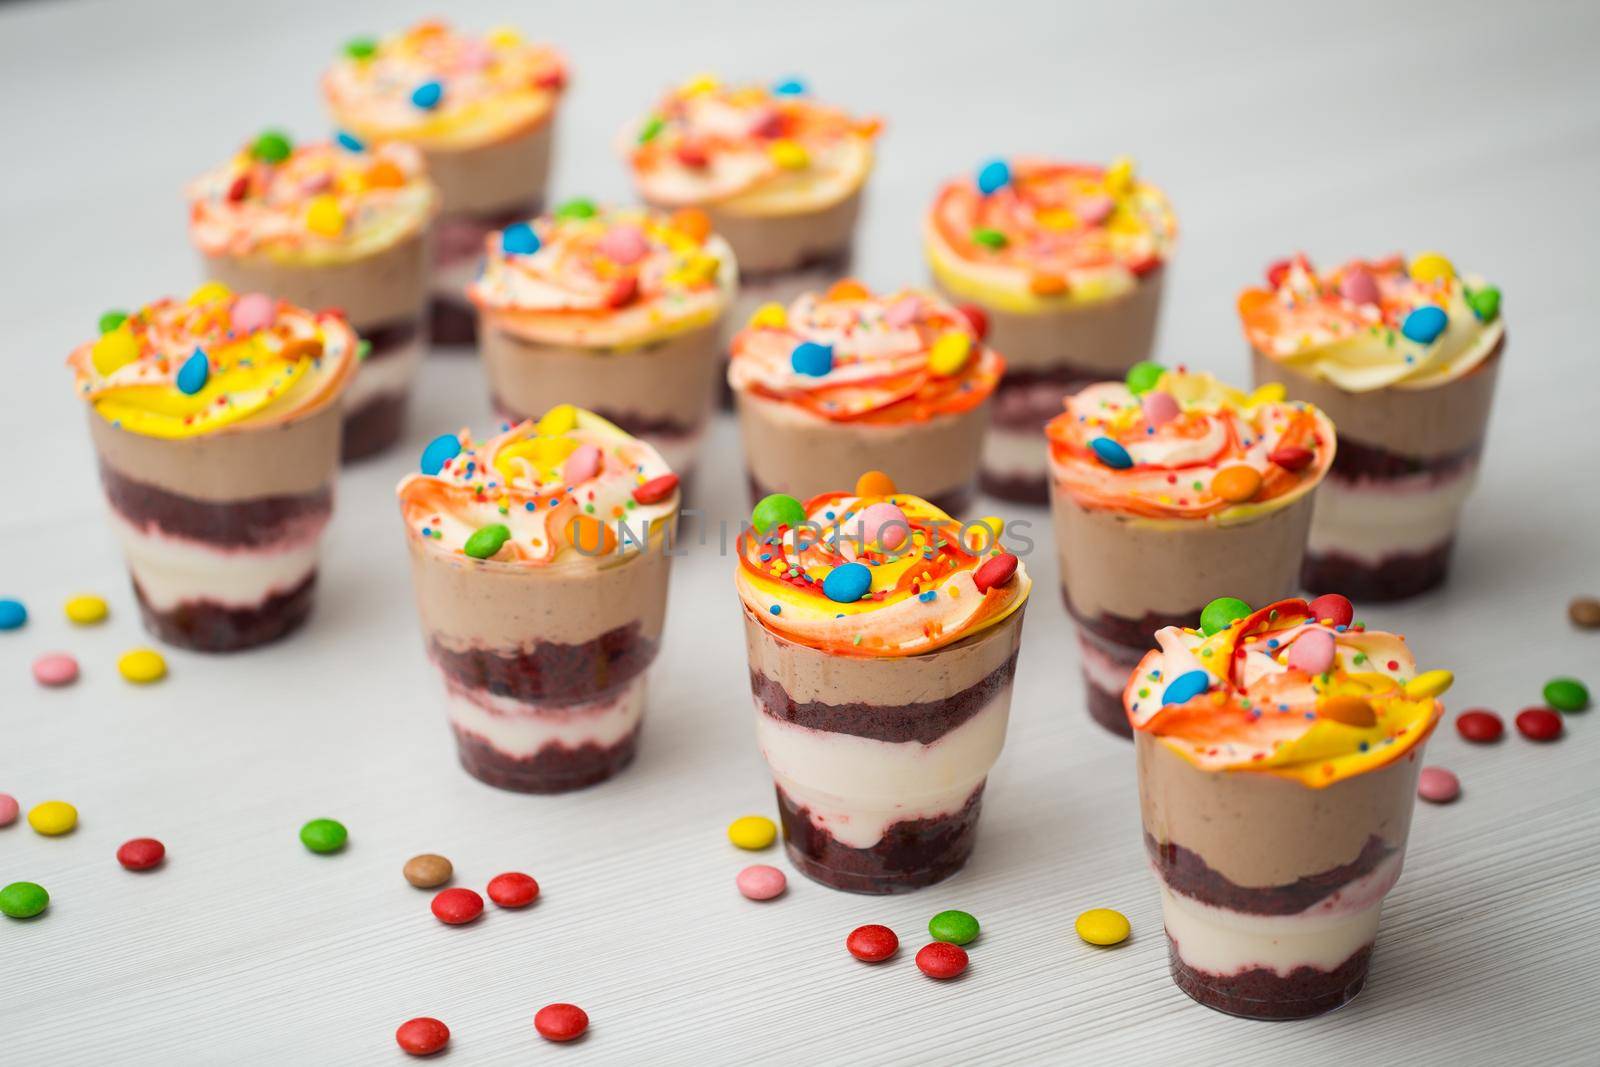 Chocolate and mousse trifle dessert in plastic cups.